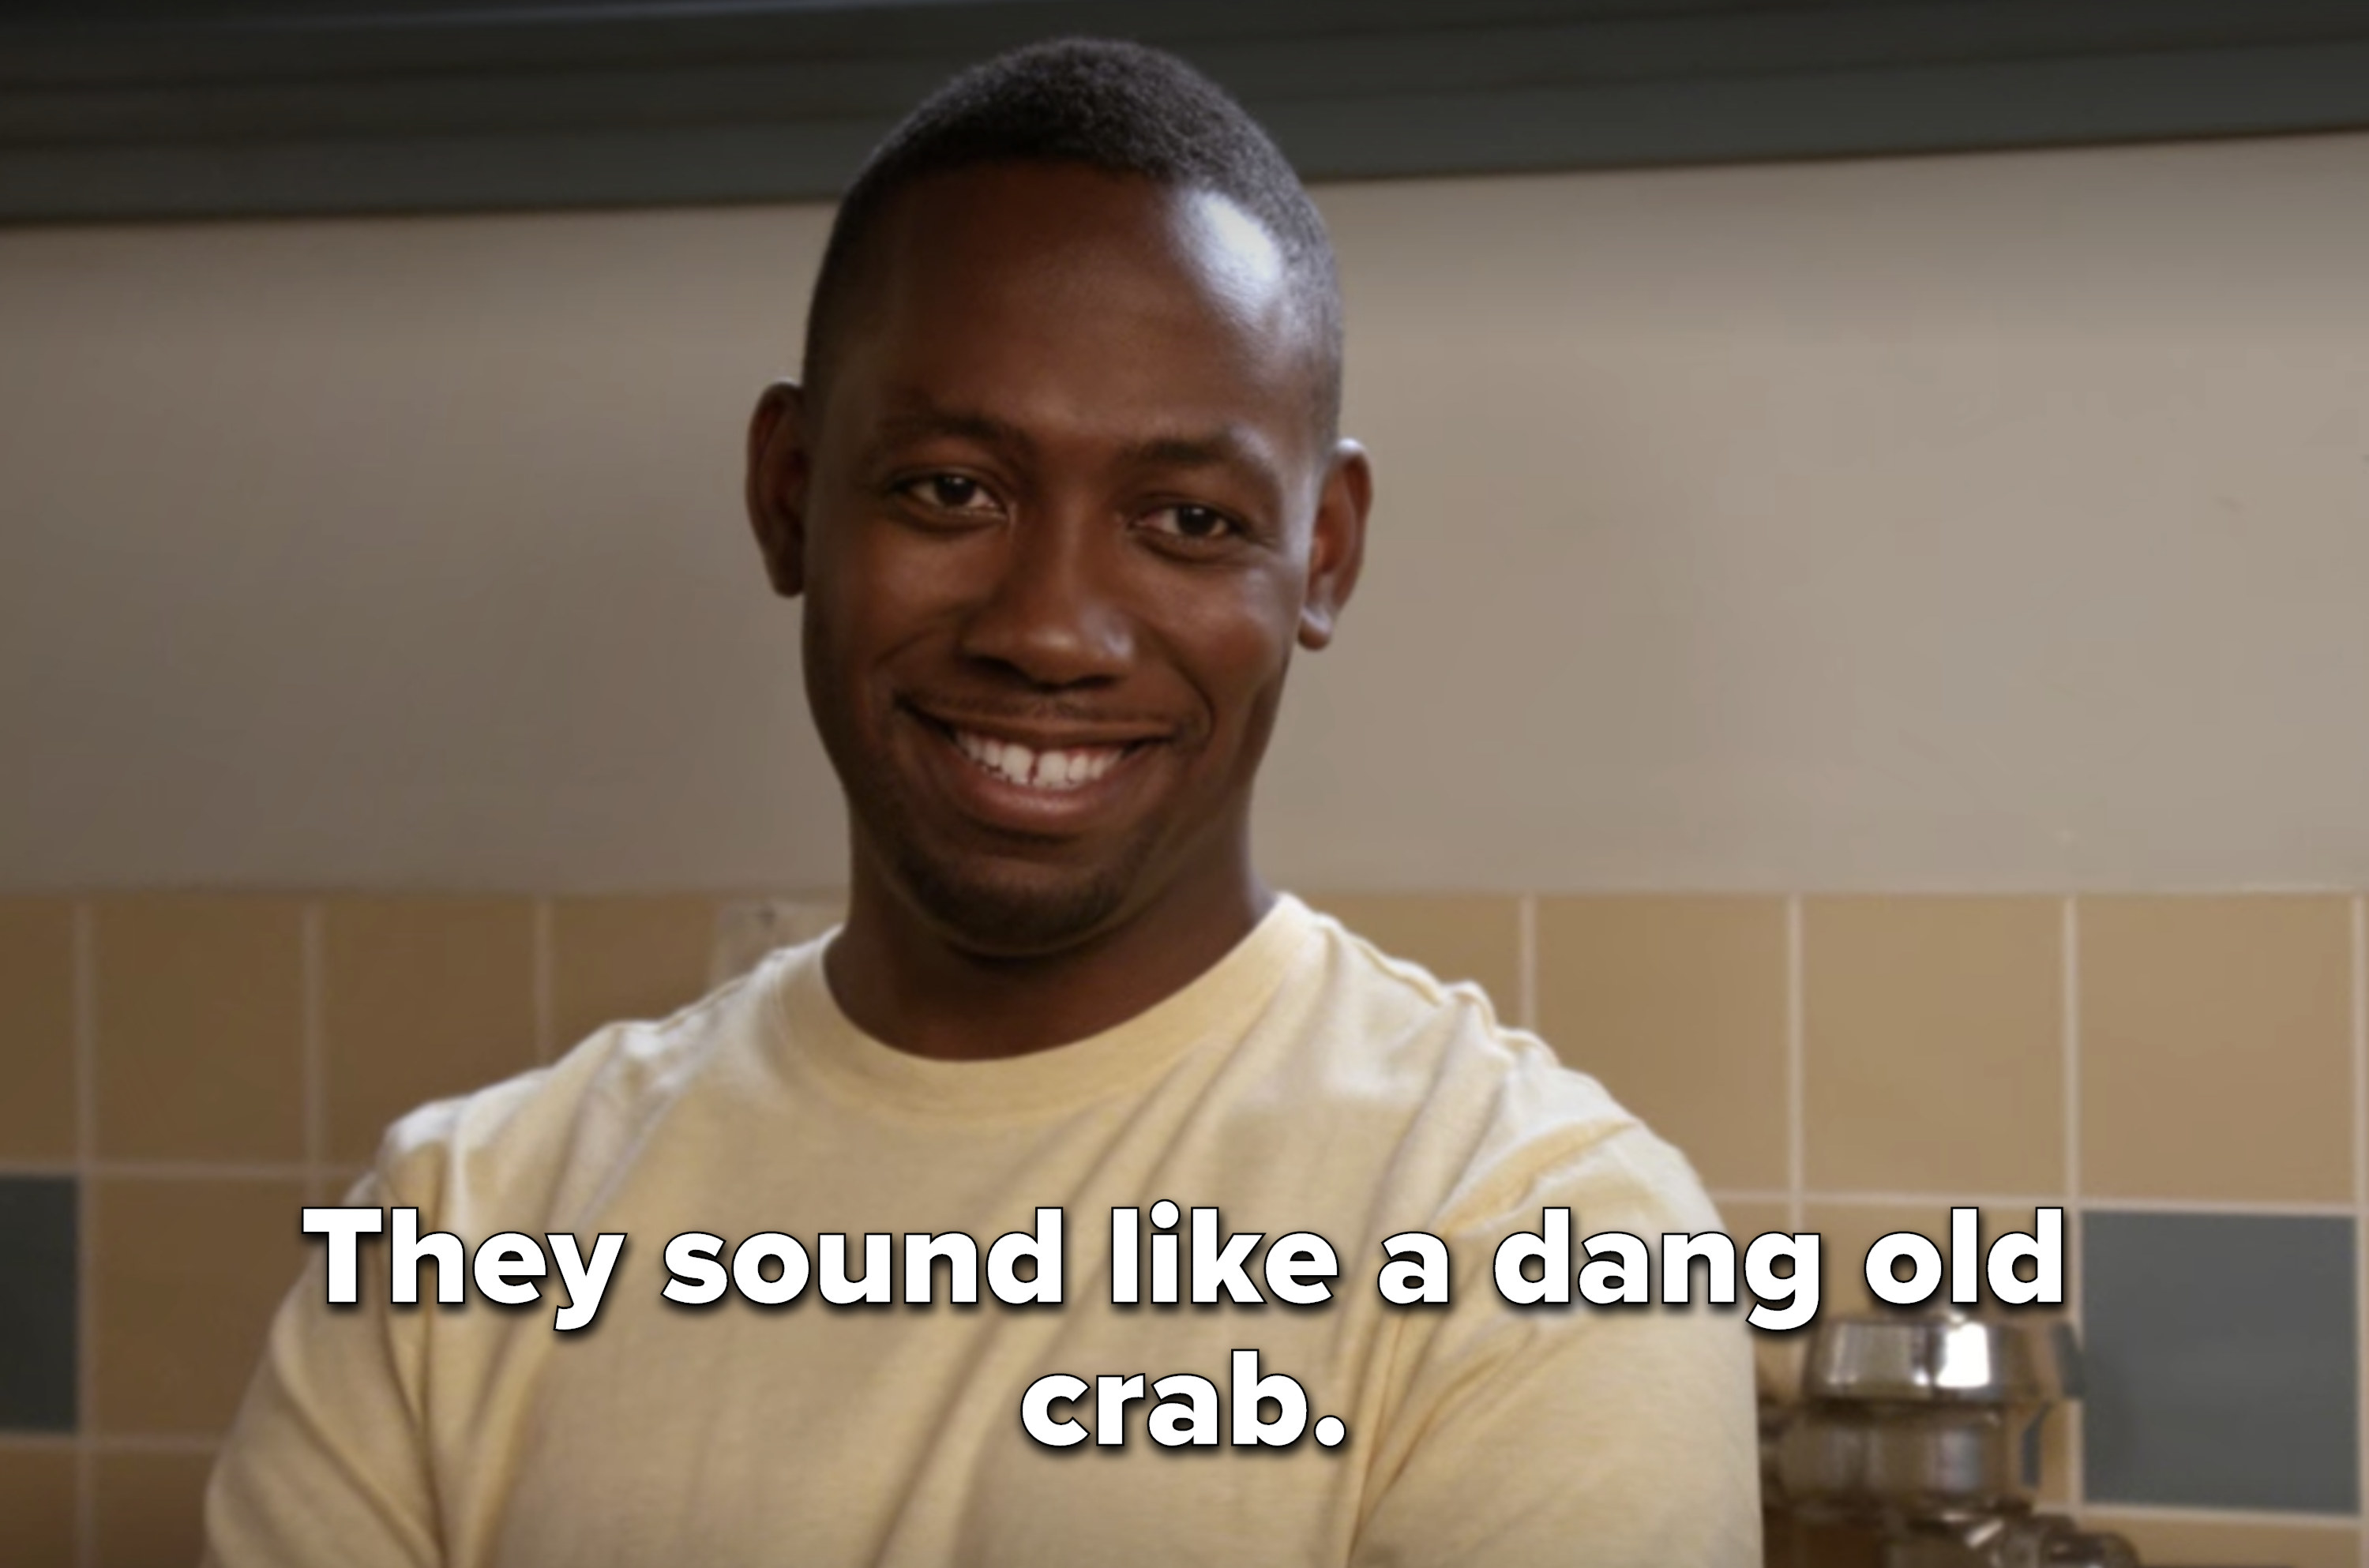 Winston saying &quot;They sound like a dang old crab&quot;